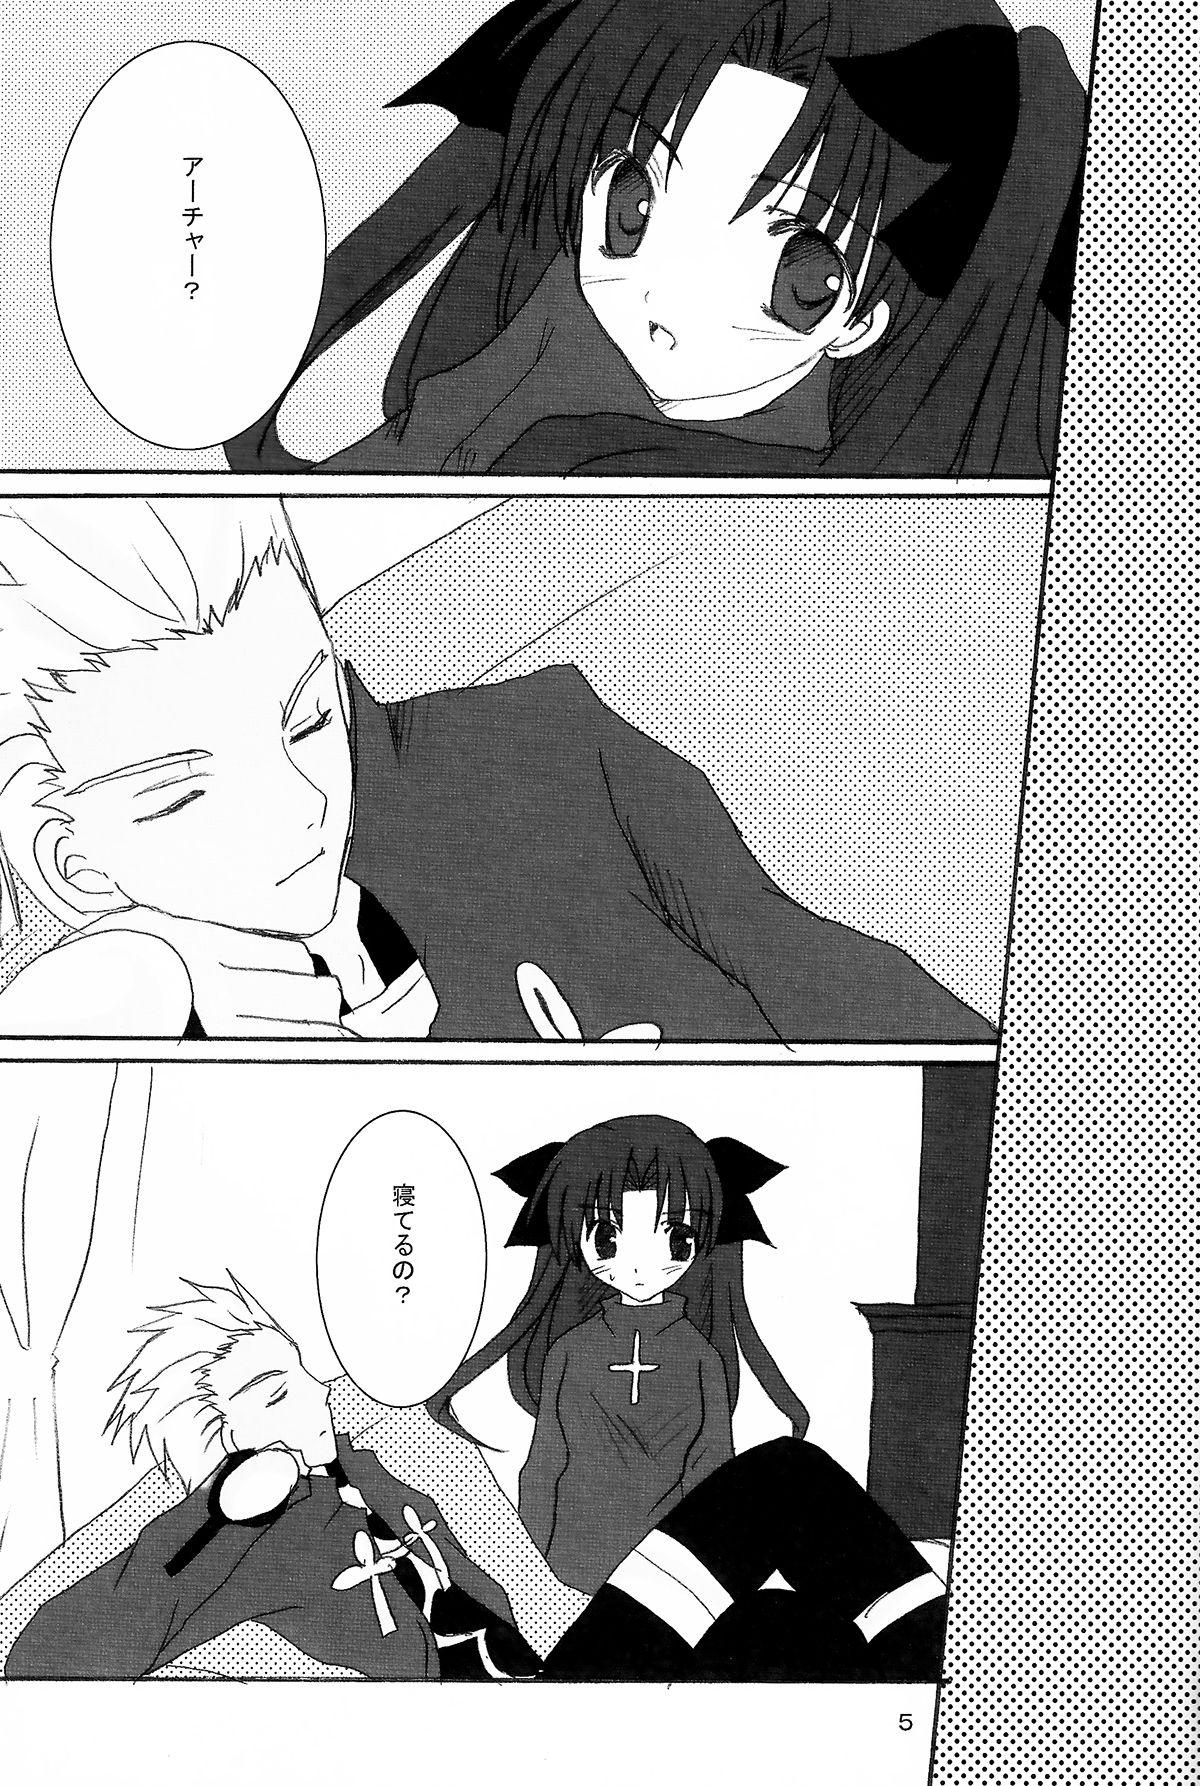 Analfuck Infinite Emotion - Fate stay night Friends - Page 3